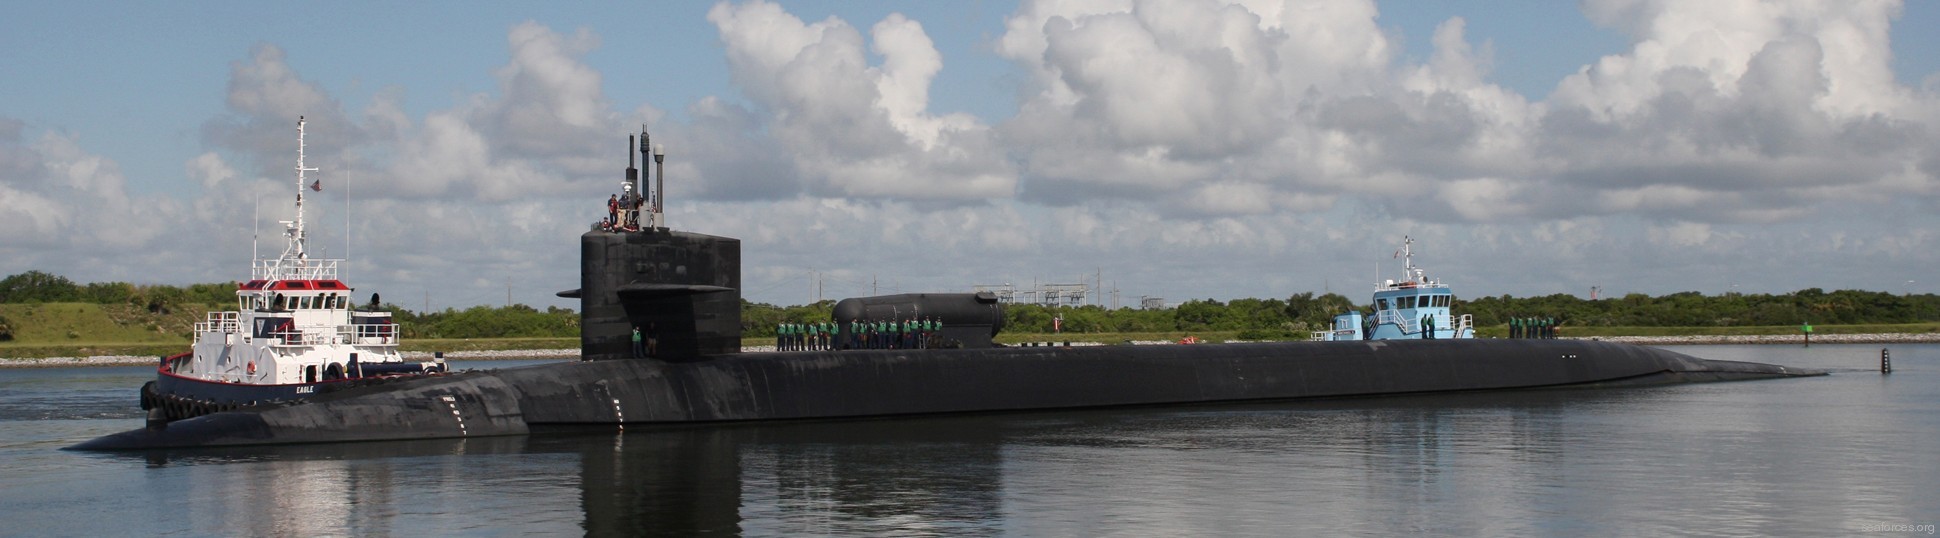 ssgn-729 uss georgia guided missile submarine 2009 33